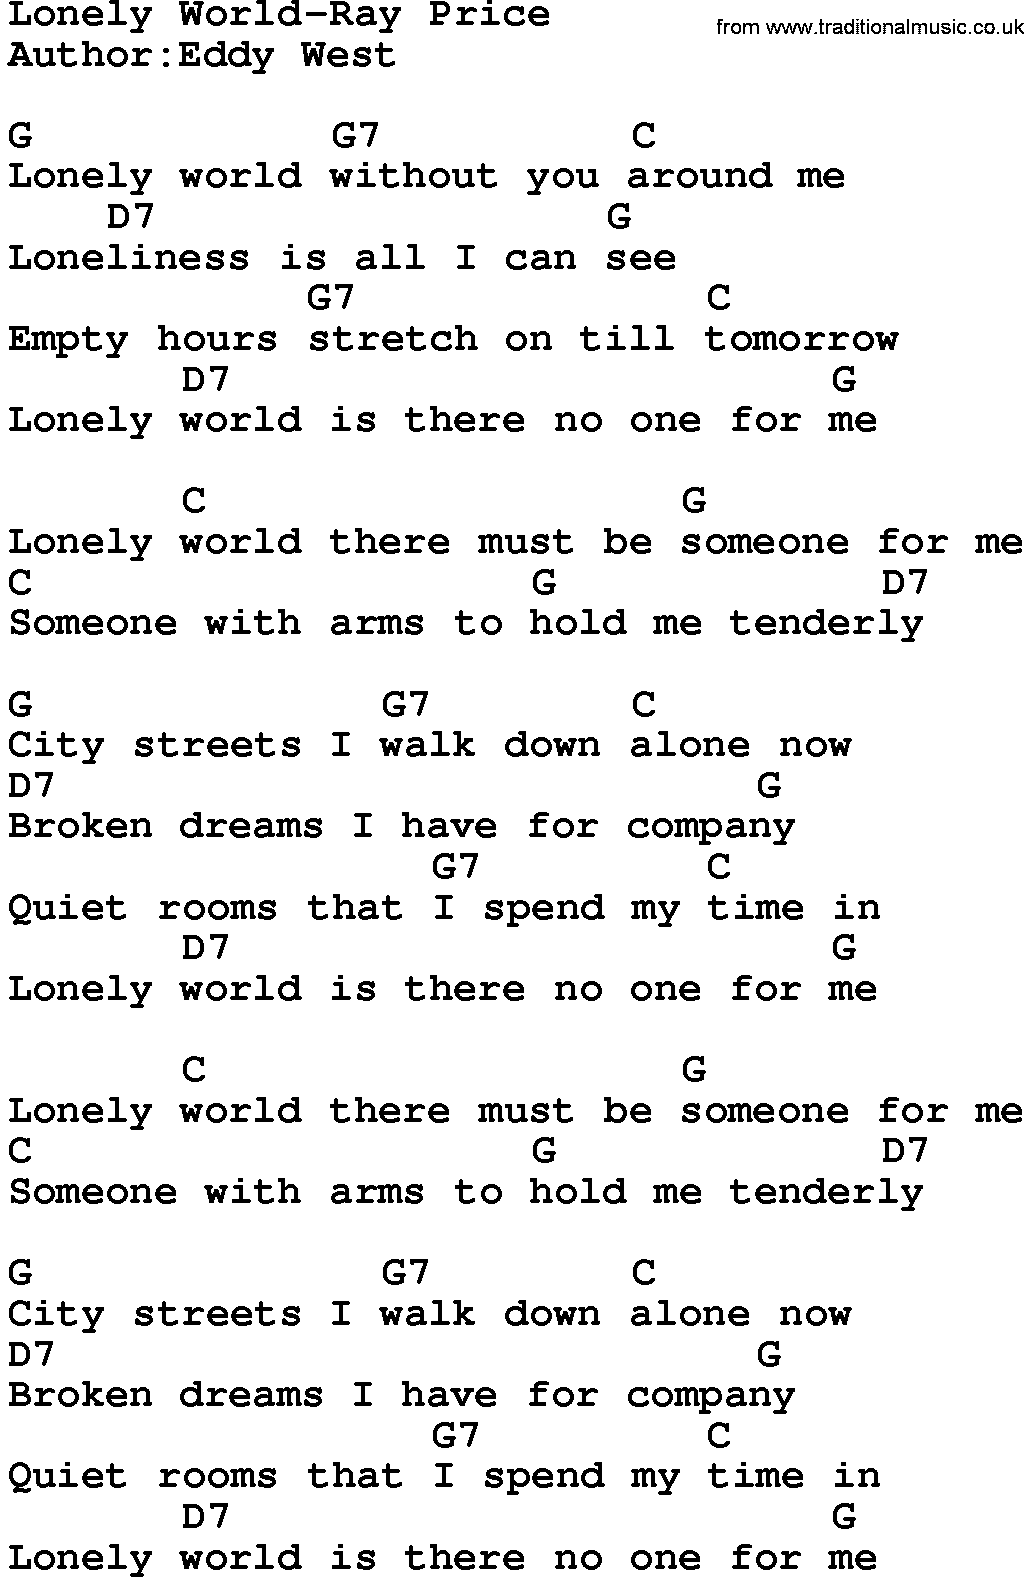 Country music song: Lonely World-Ray Price lyrics and chords